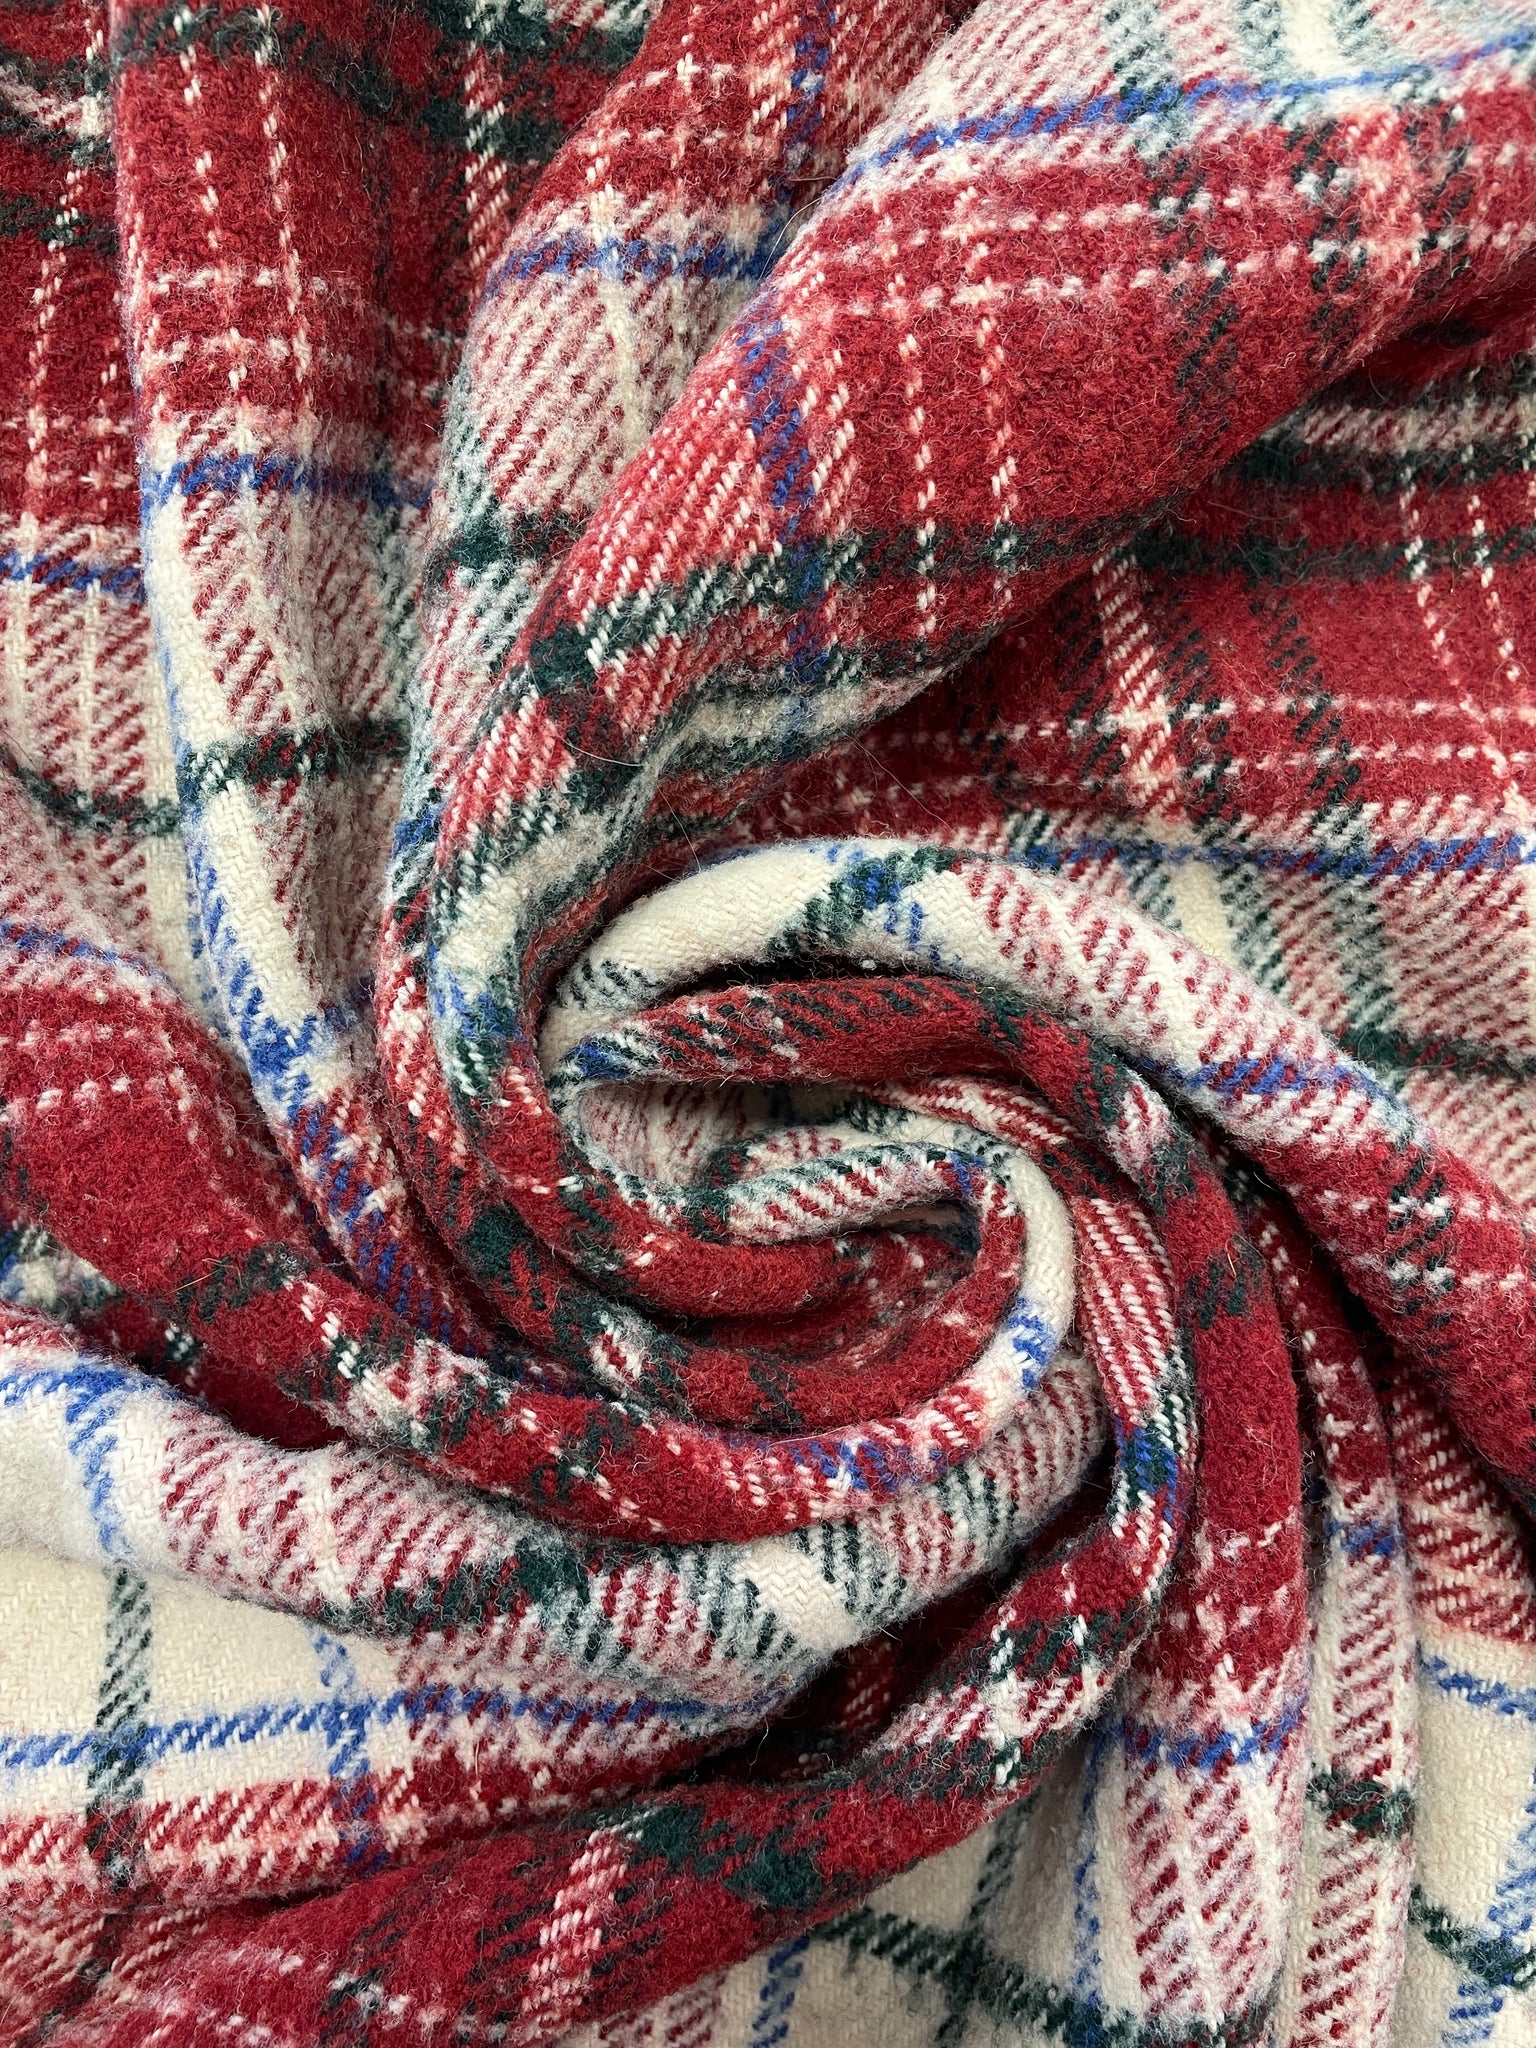 2 YD Wool Plaid Blanket Vintage Salvaged - Red, Off White, Green and Blue